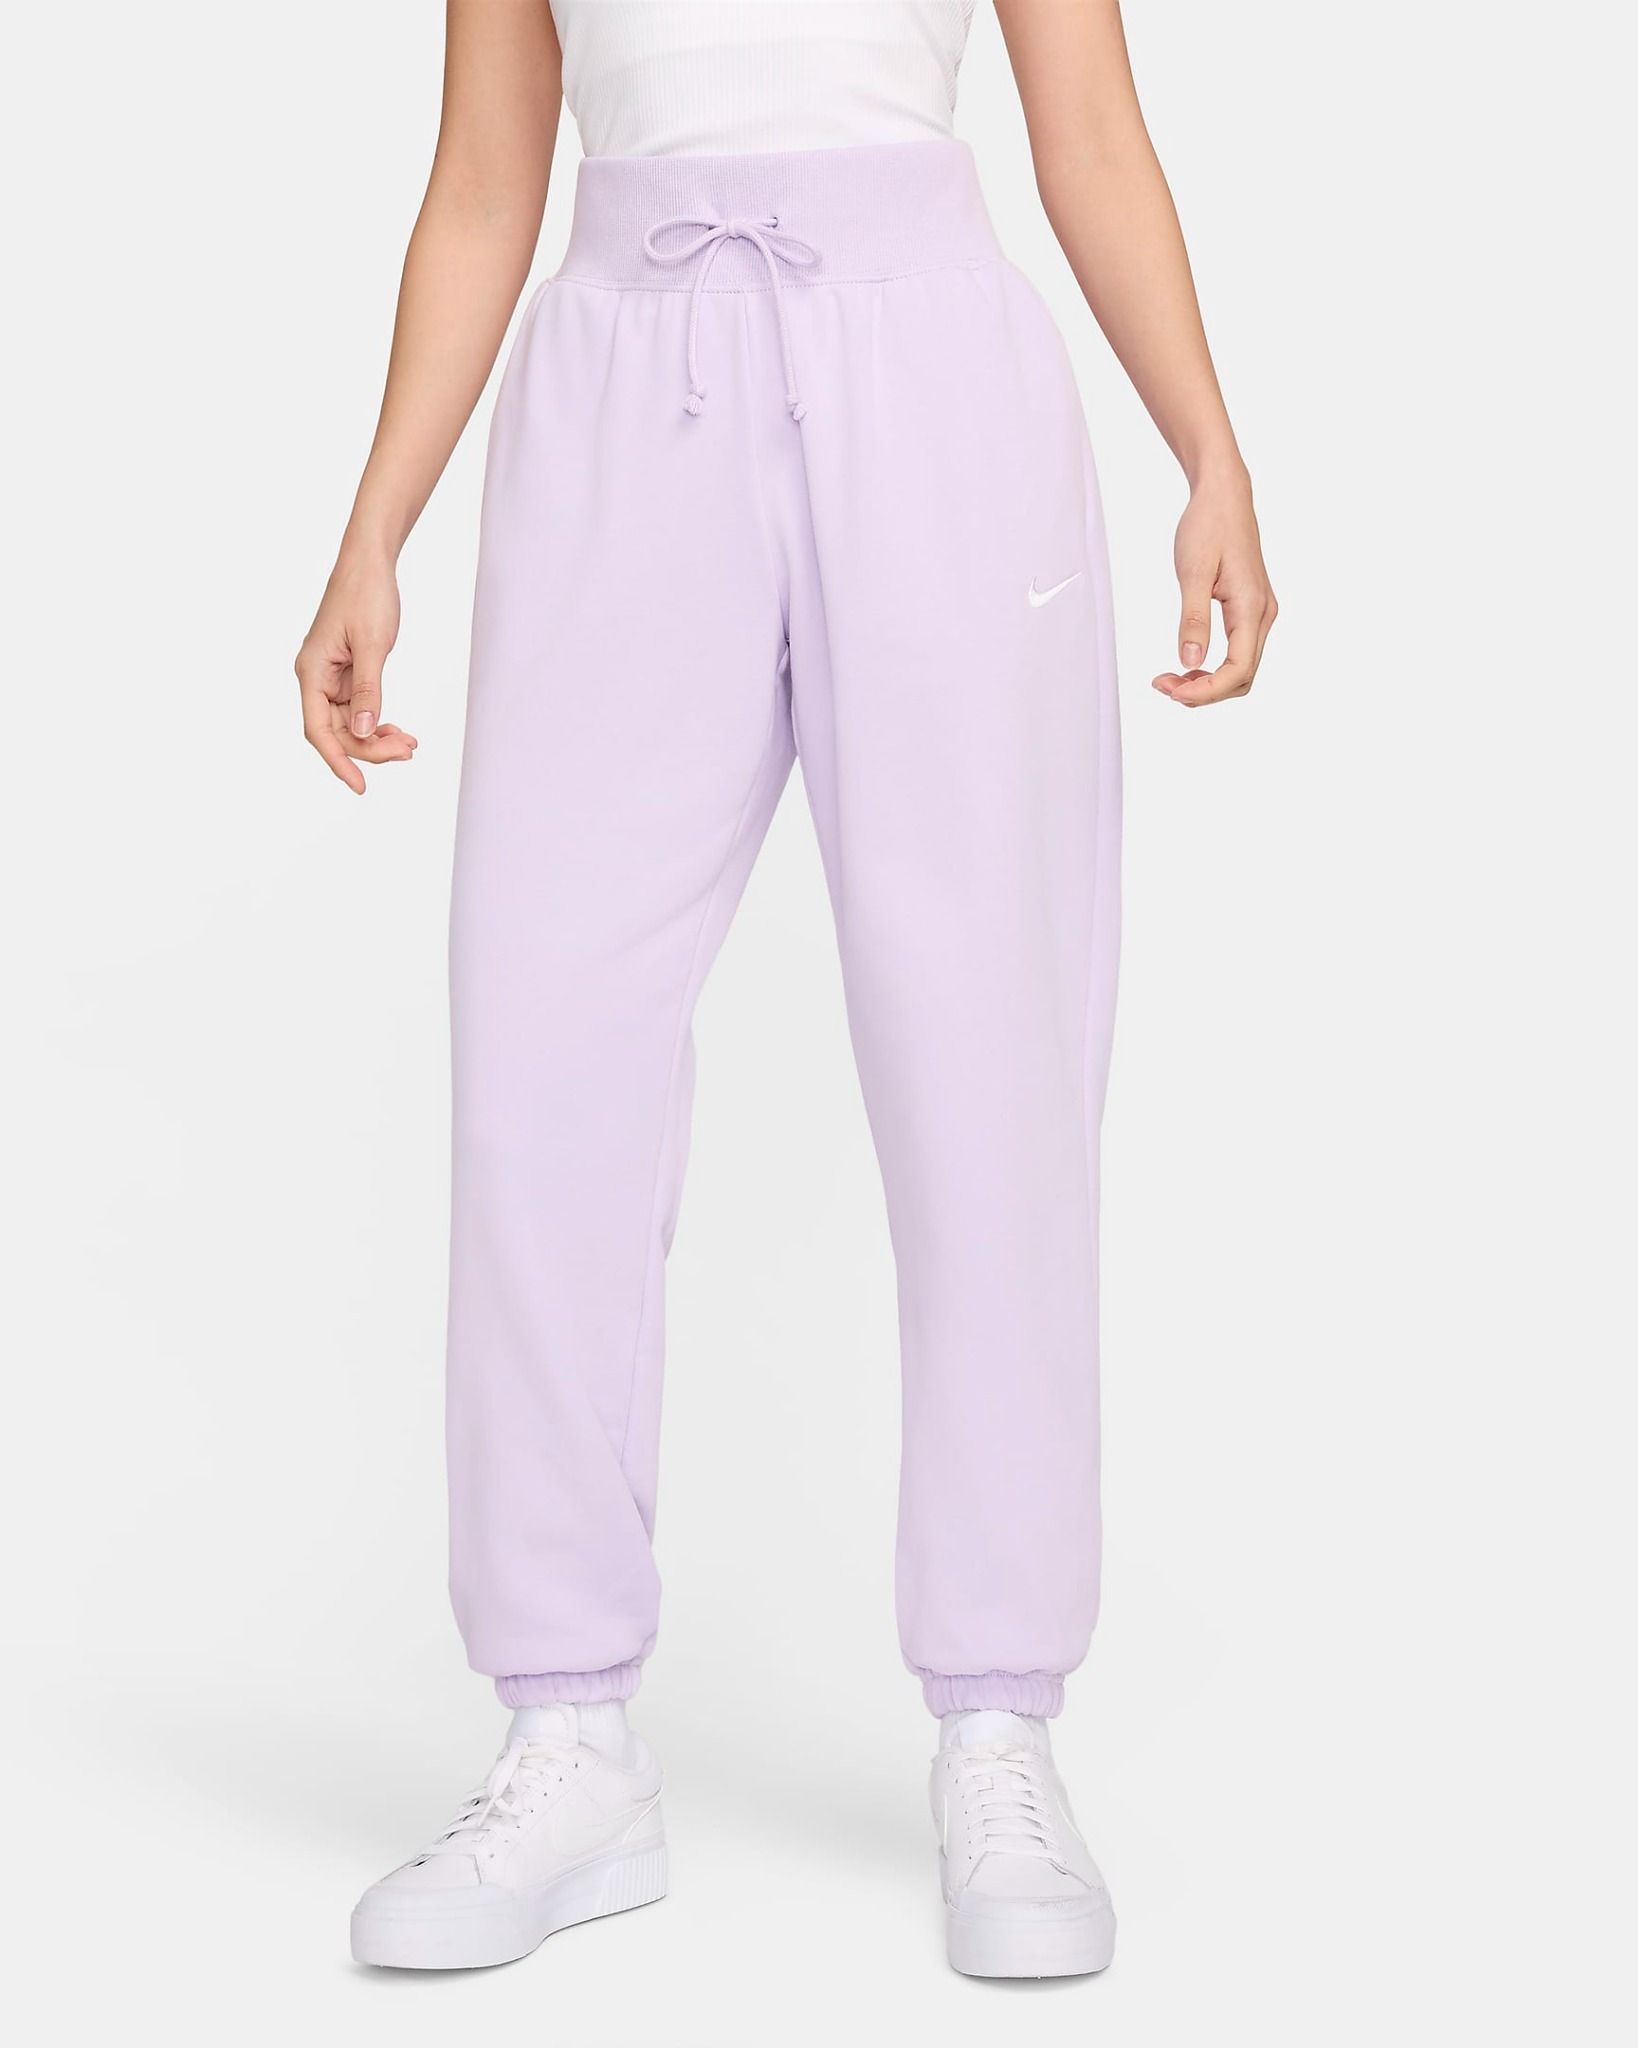 Nike - Quần dài thể thao Nữ Phoenix Fleece High-Waisted Oversized French Terry Tracksuit Bottoms